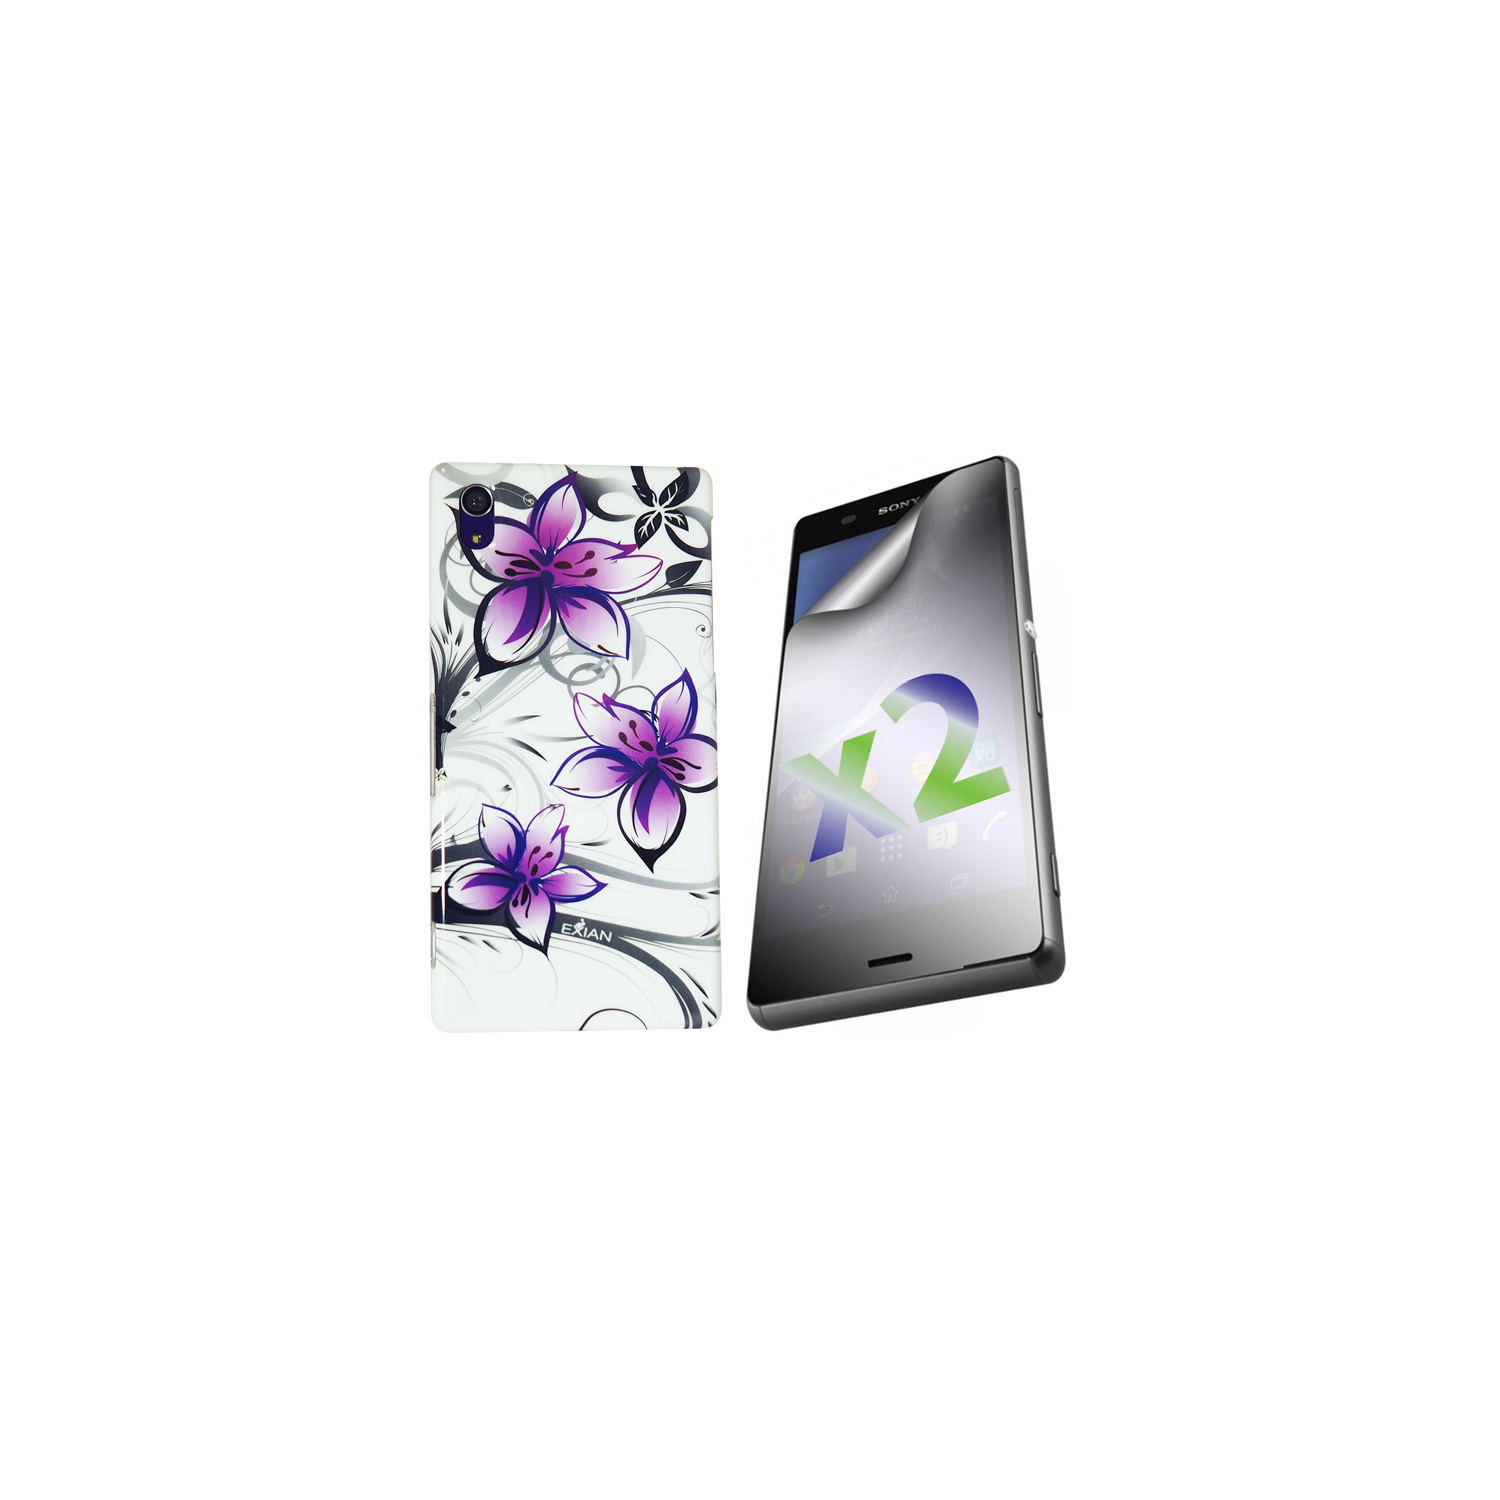 Exian Sony Xperia Z3 Screen Protectors X 2 and TPU Case Exian Design TPU Purple Floral